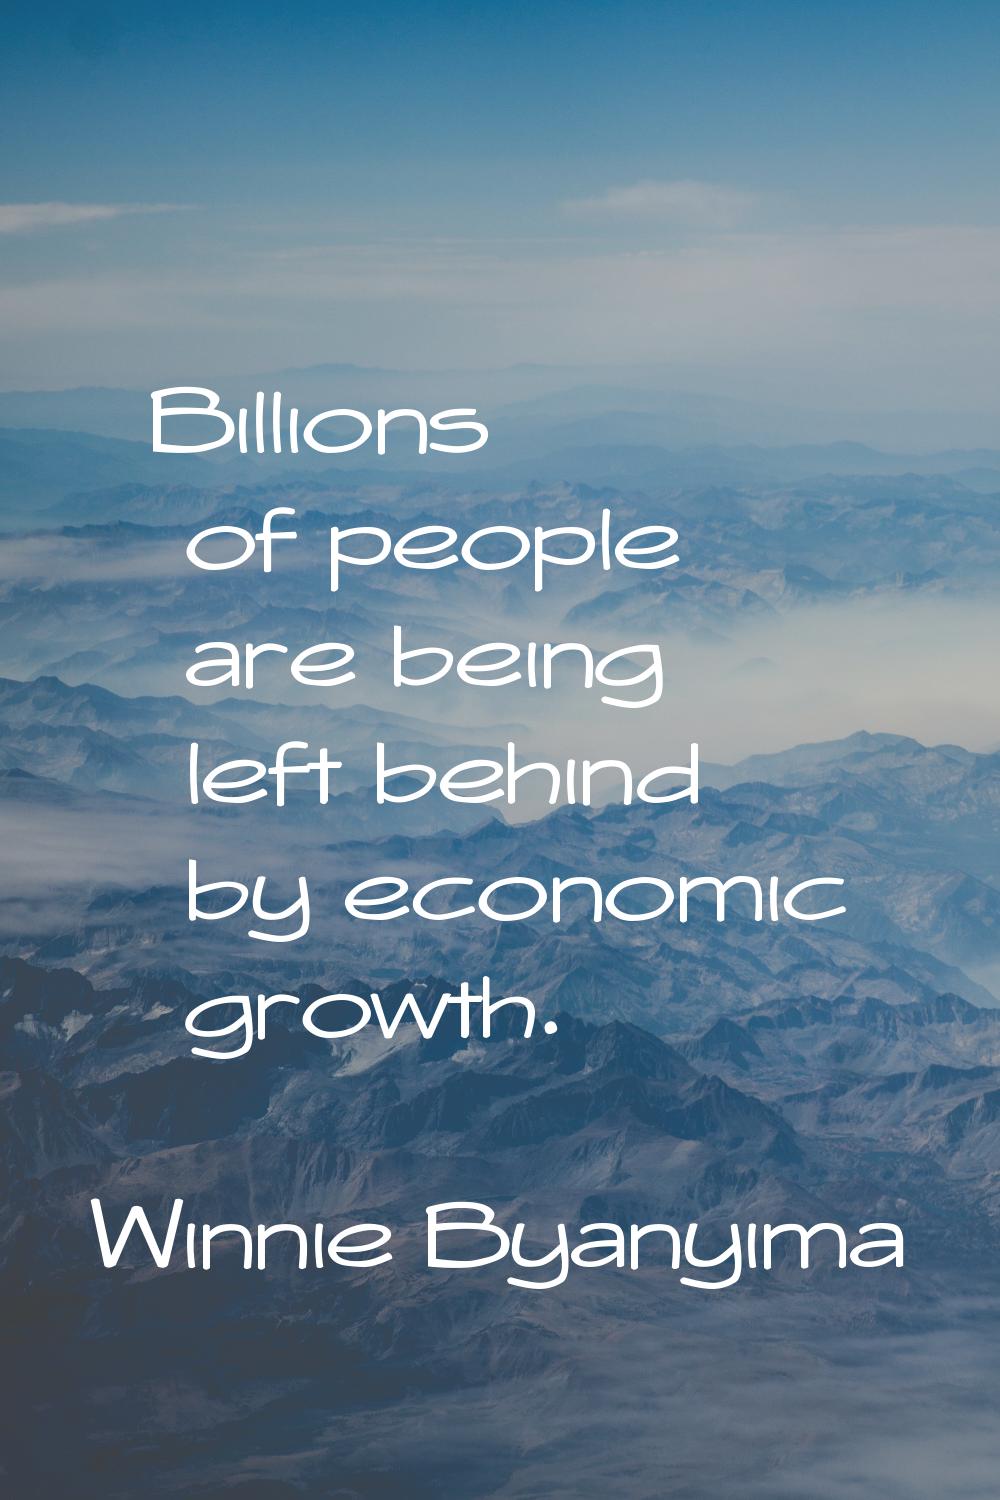 Billions of people are being left behind by economic growth.